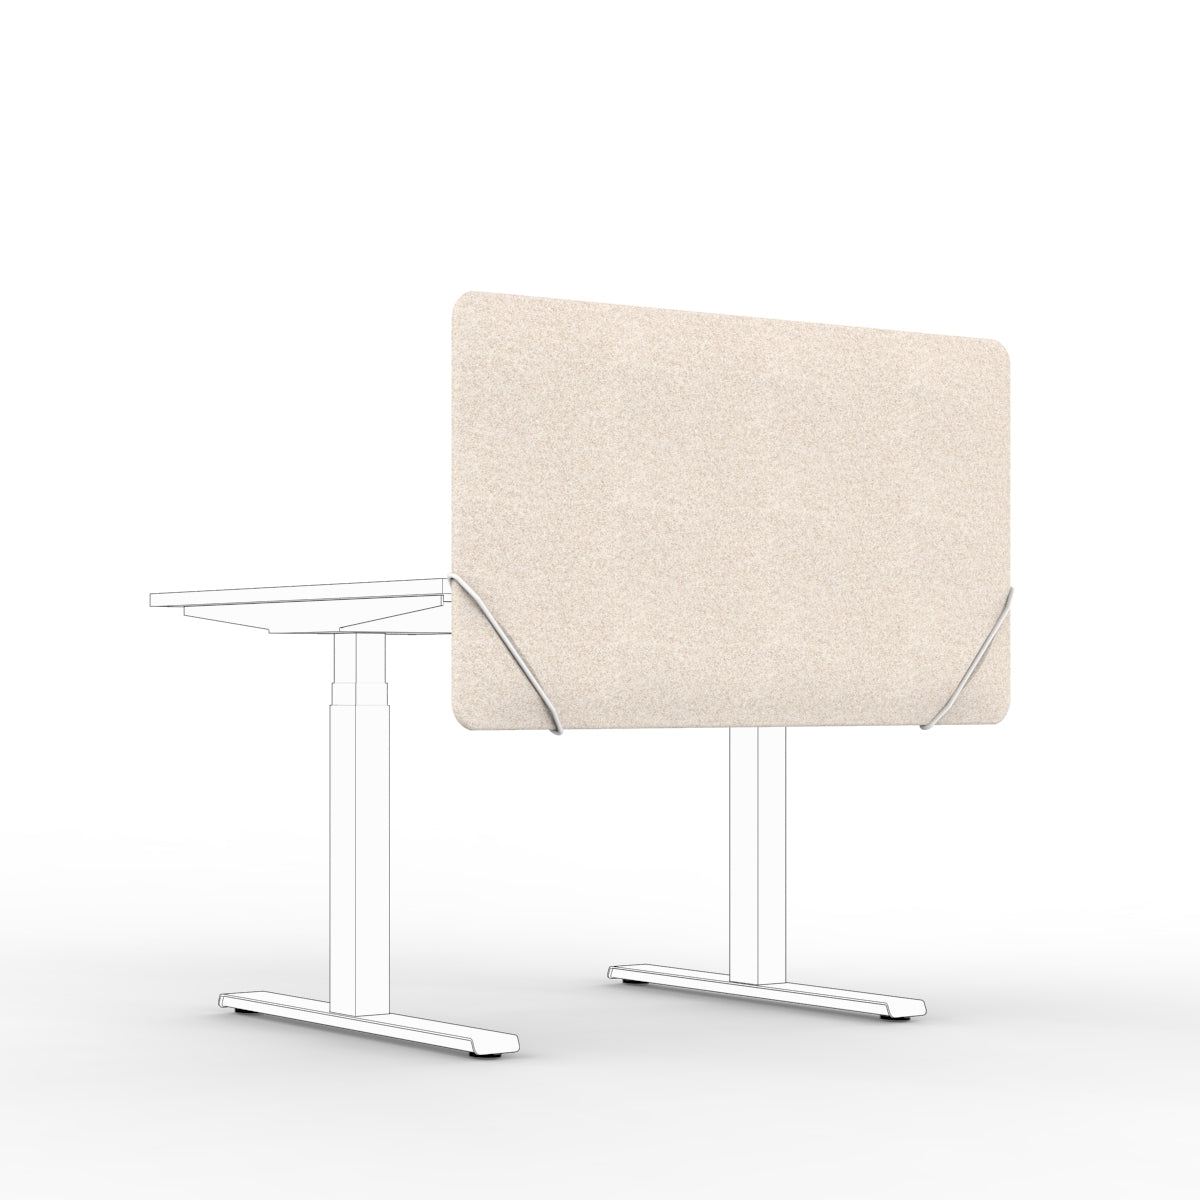 Table screen sound absorber in natural beige wool with white slide on table mounts. 